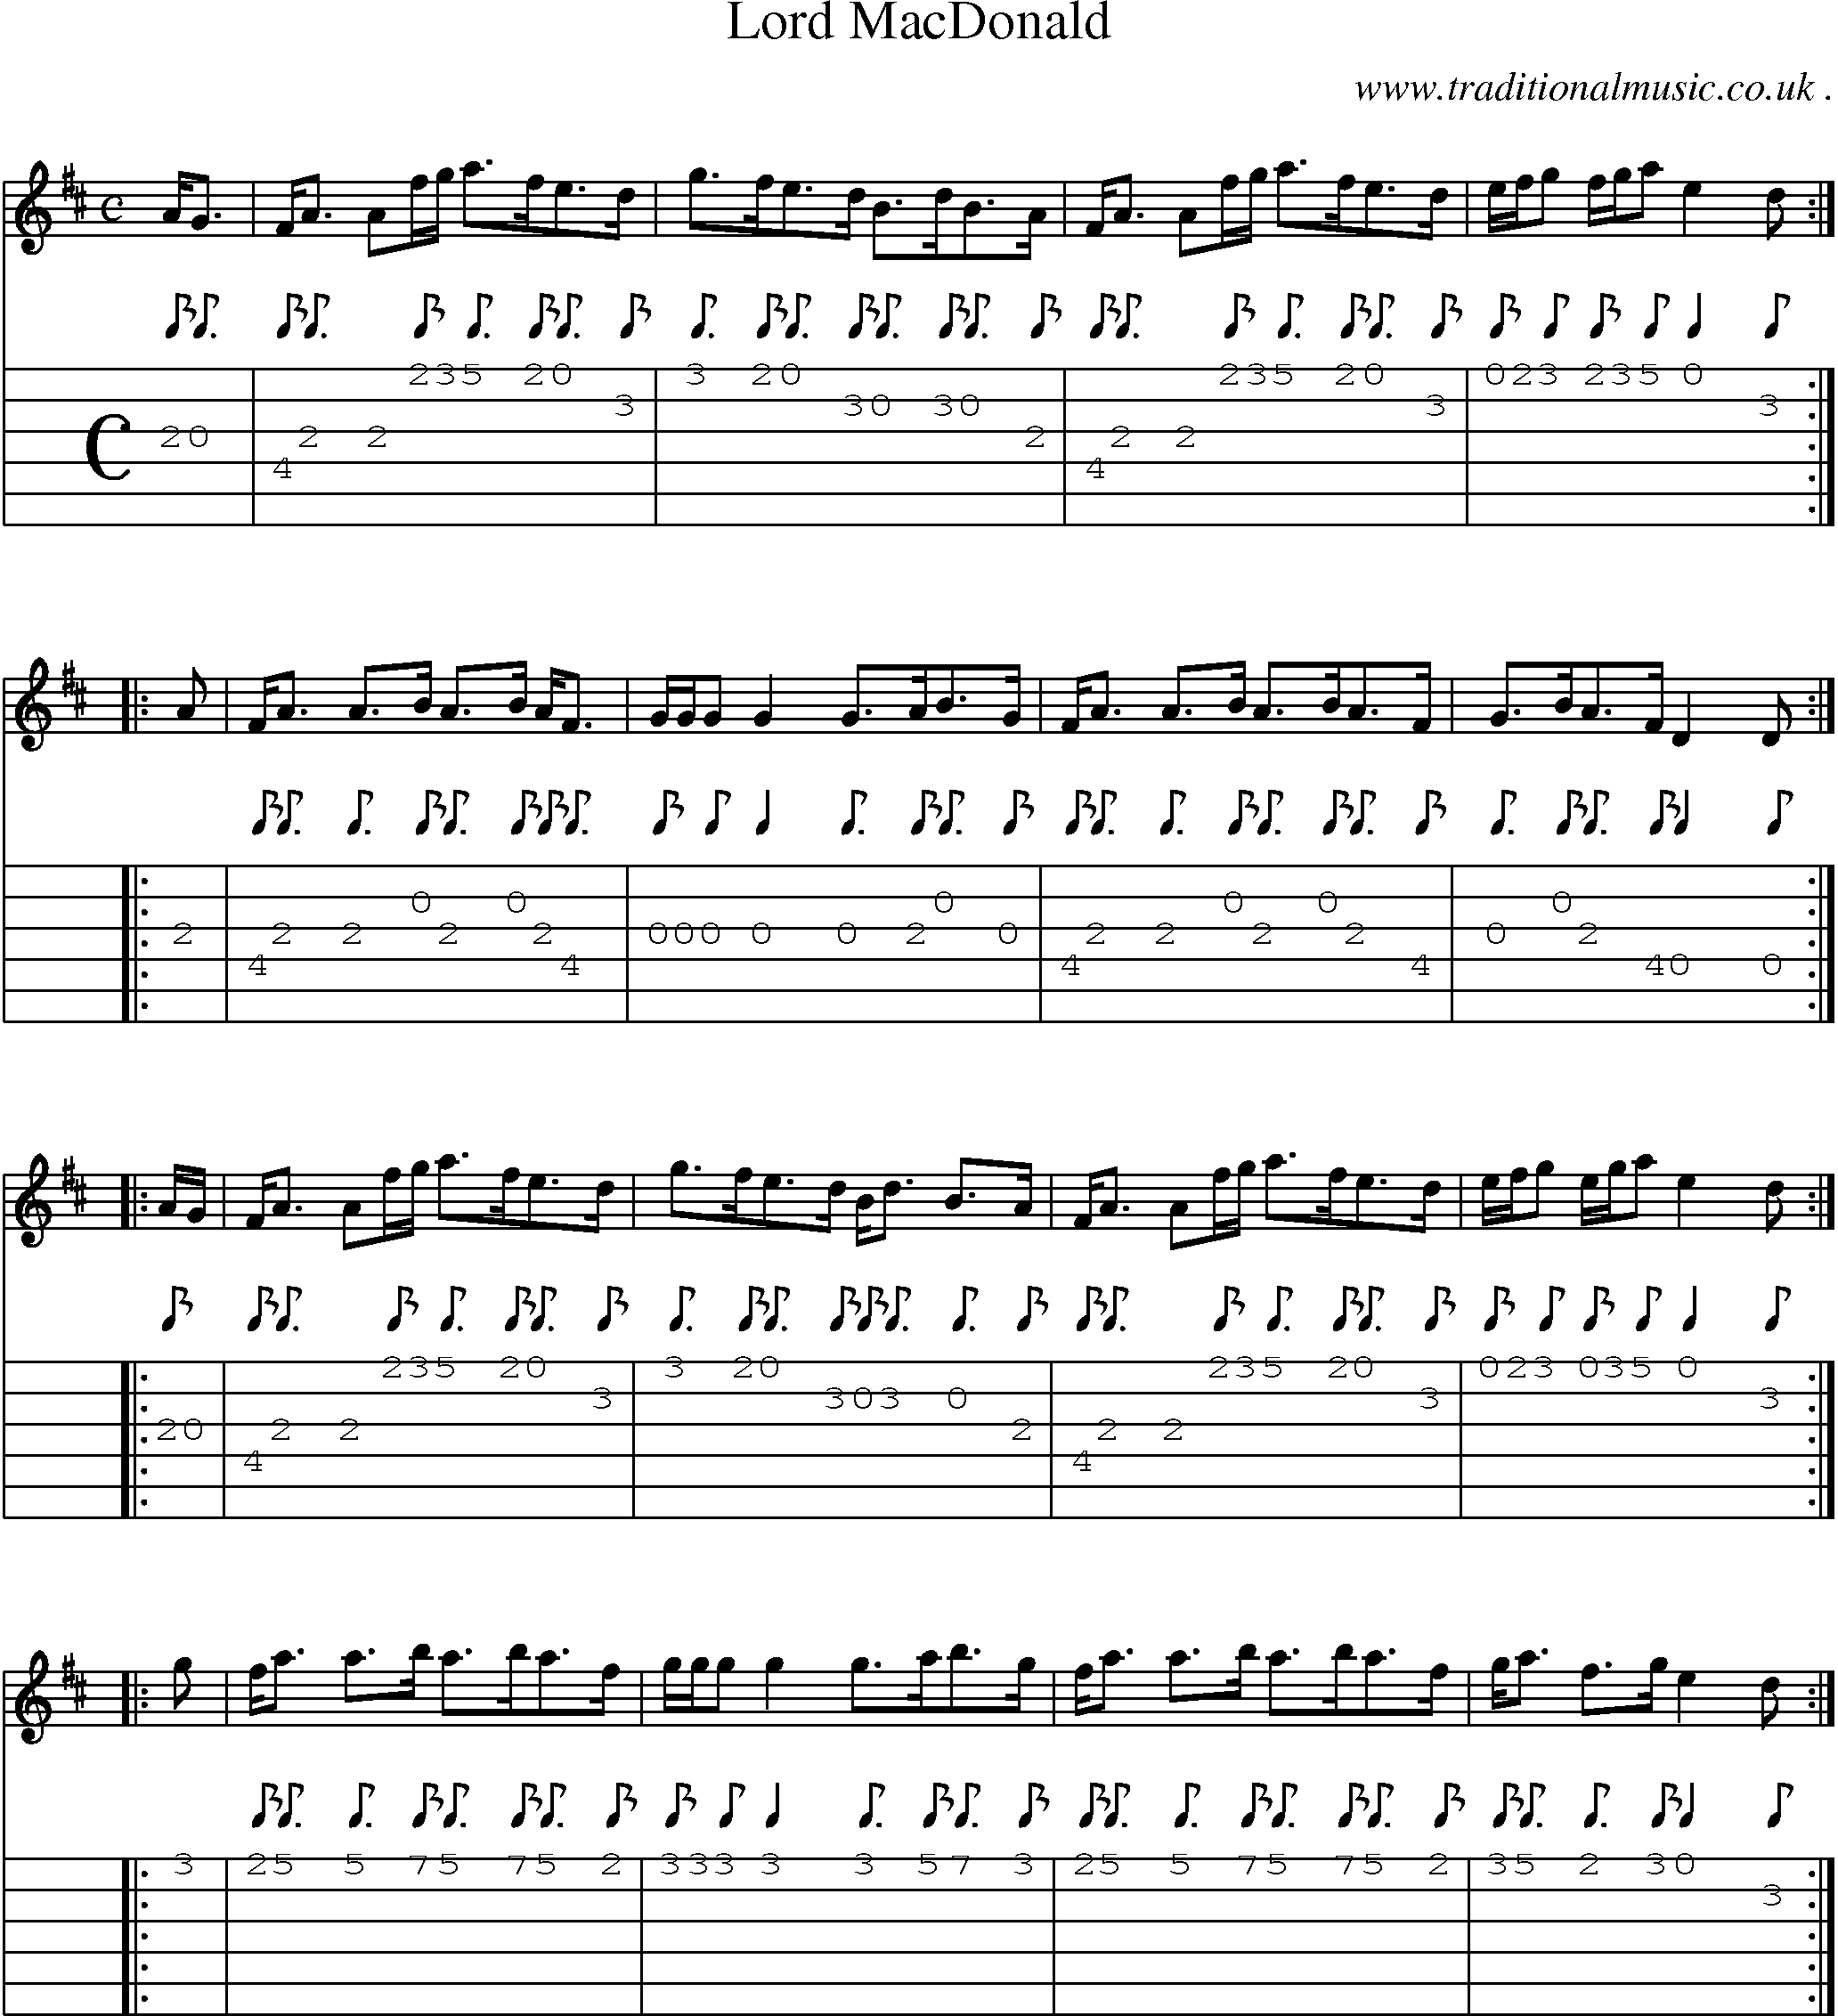 Sheet-music  score, Chords and Guitar Tabs for Lord Macdonald